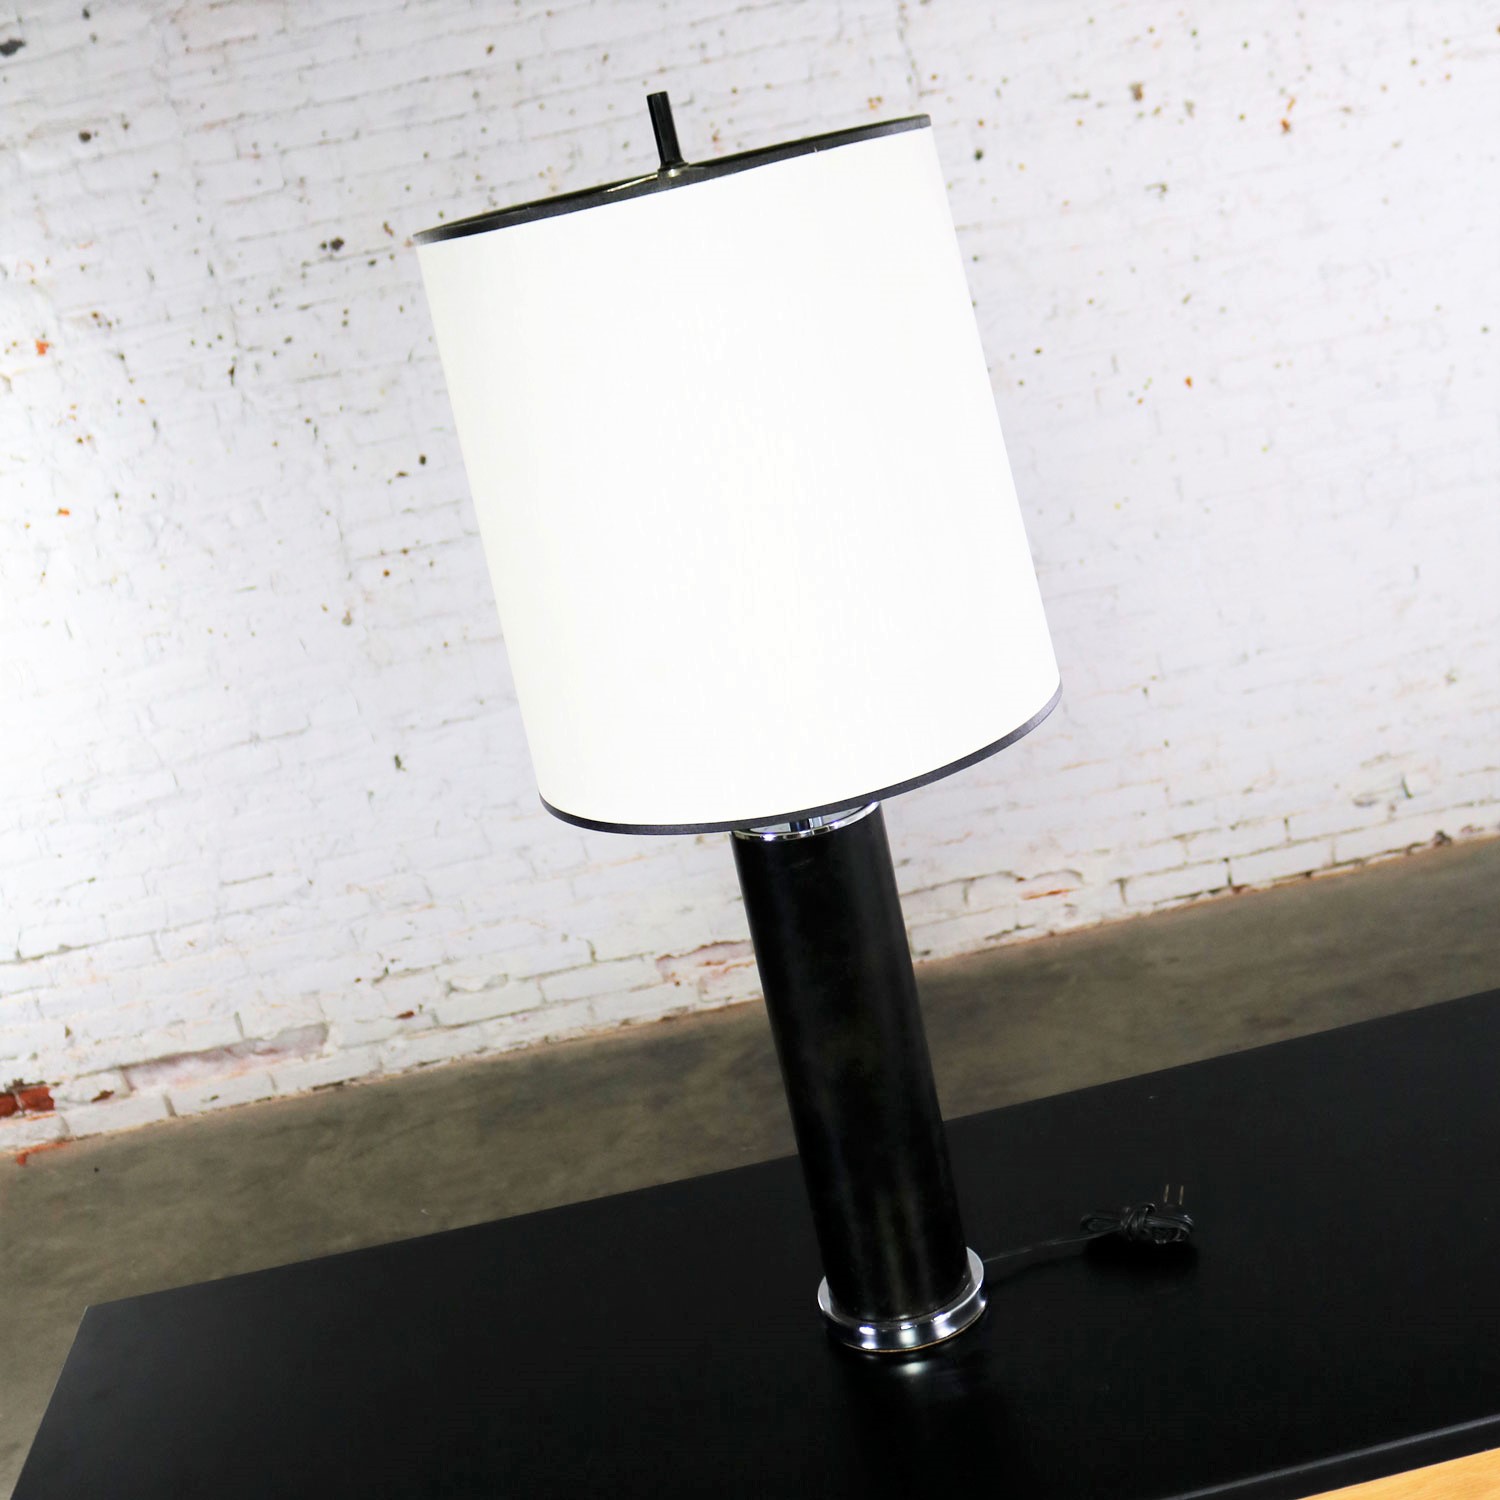 Chrome & Black Faux Leather International Style Cylindrical Table Lamp After Walter von Nessen